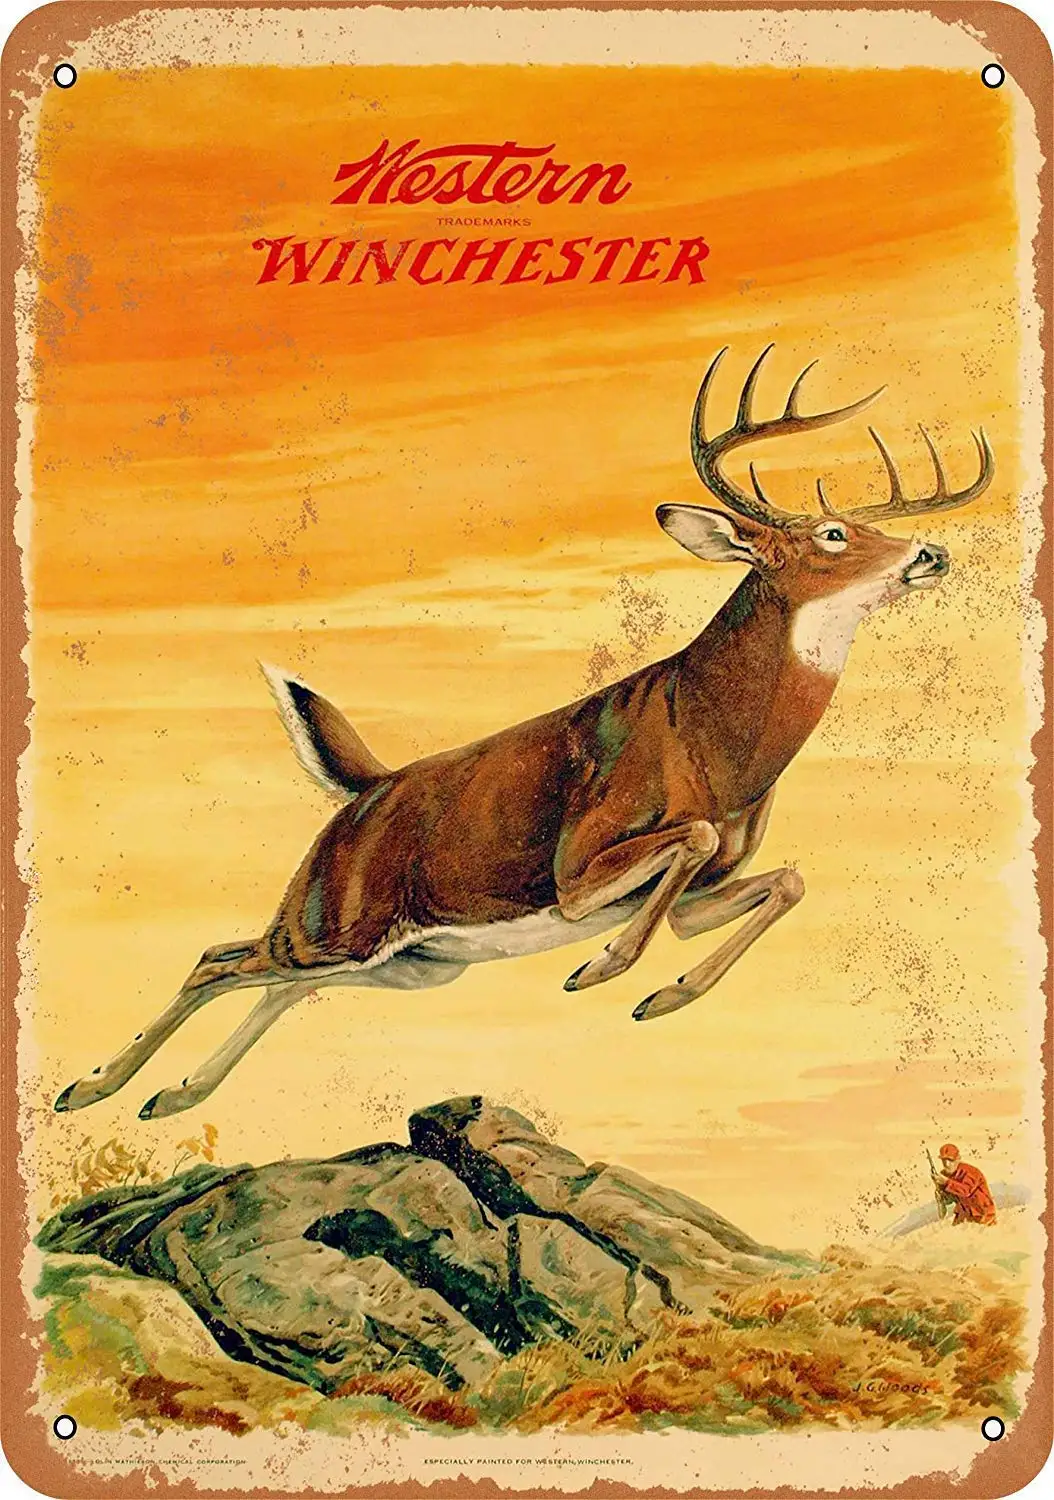 

Wisesign Metal Tin Sign 8x12 inche - Vintage Style/Rusty Look 1958 Western Winchester Deer - Plaque Poster for Bar Pub Beer Home